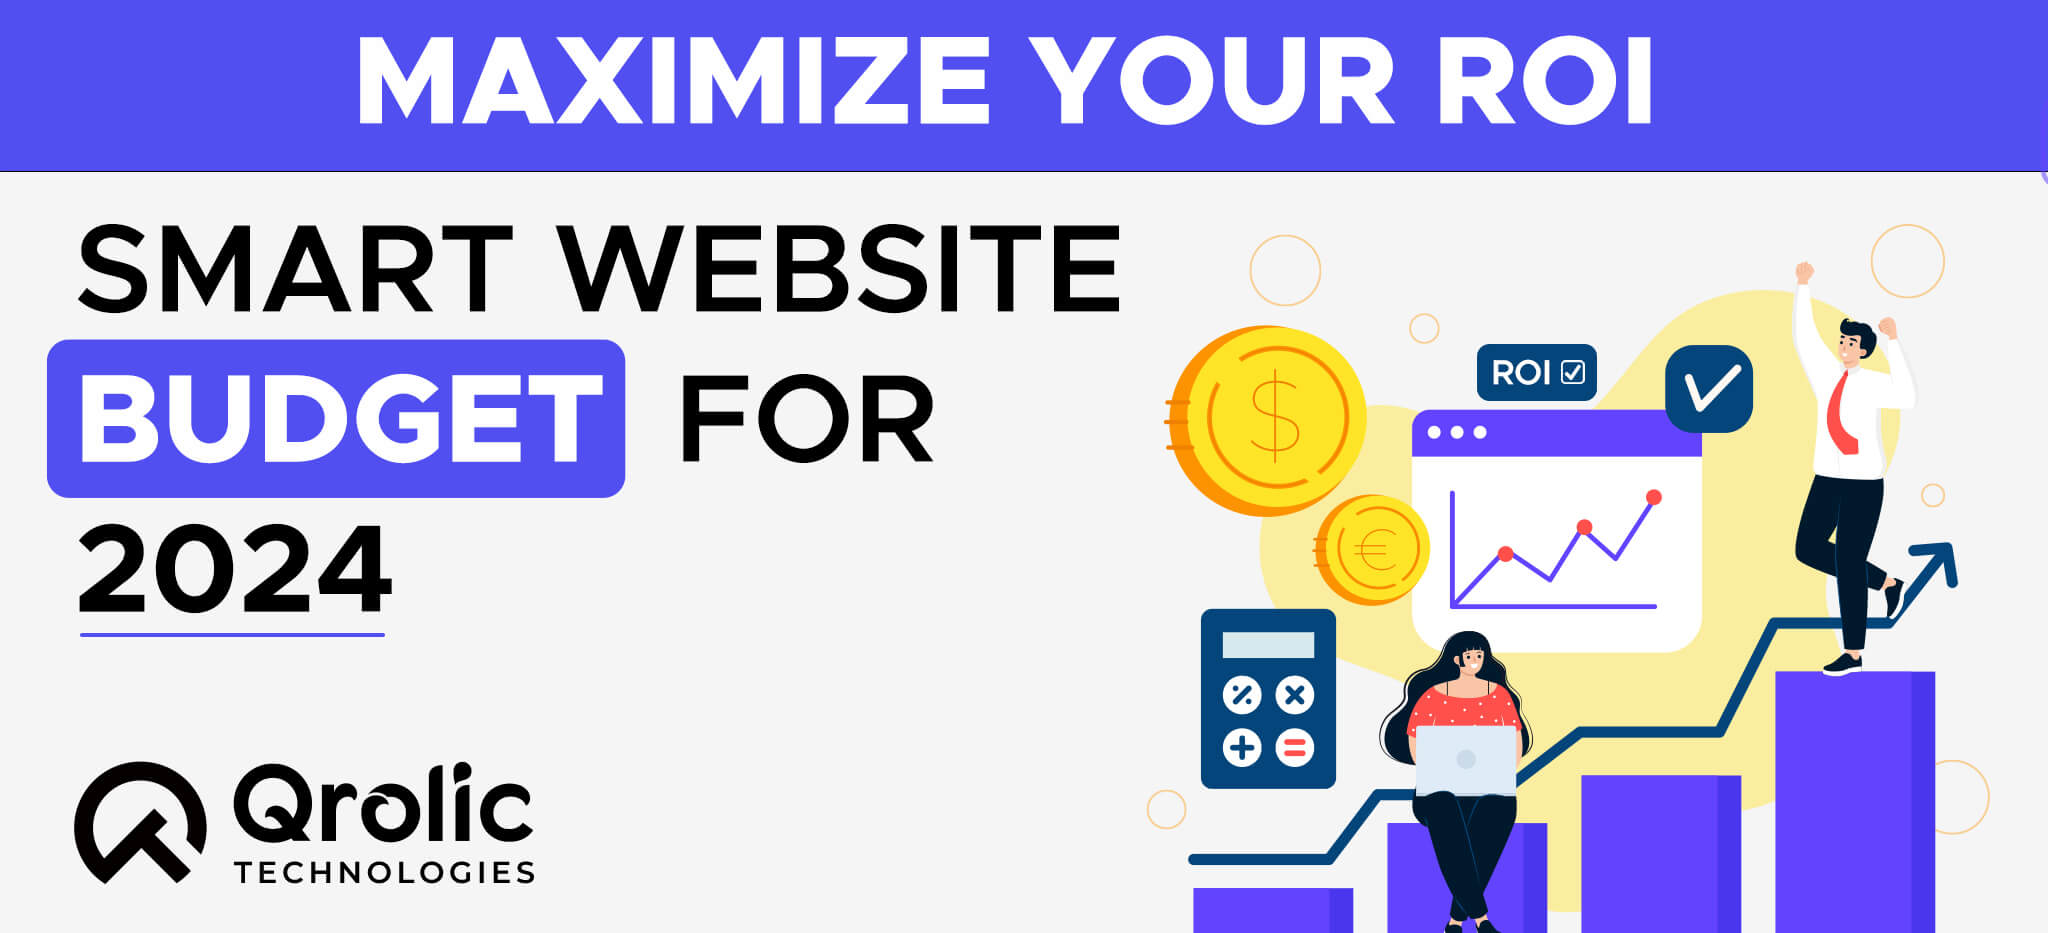 Maximize Your ROI: Smart Website Budget for 2024